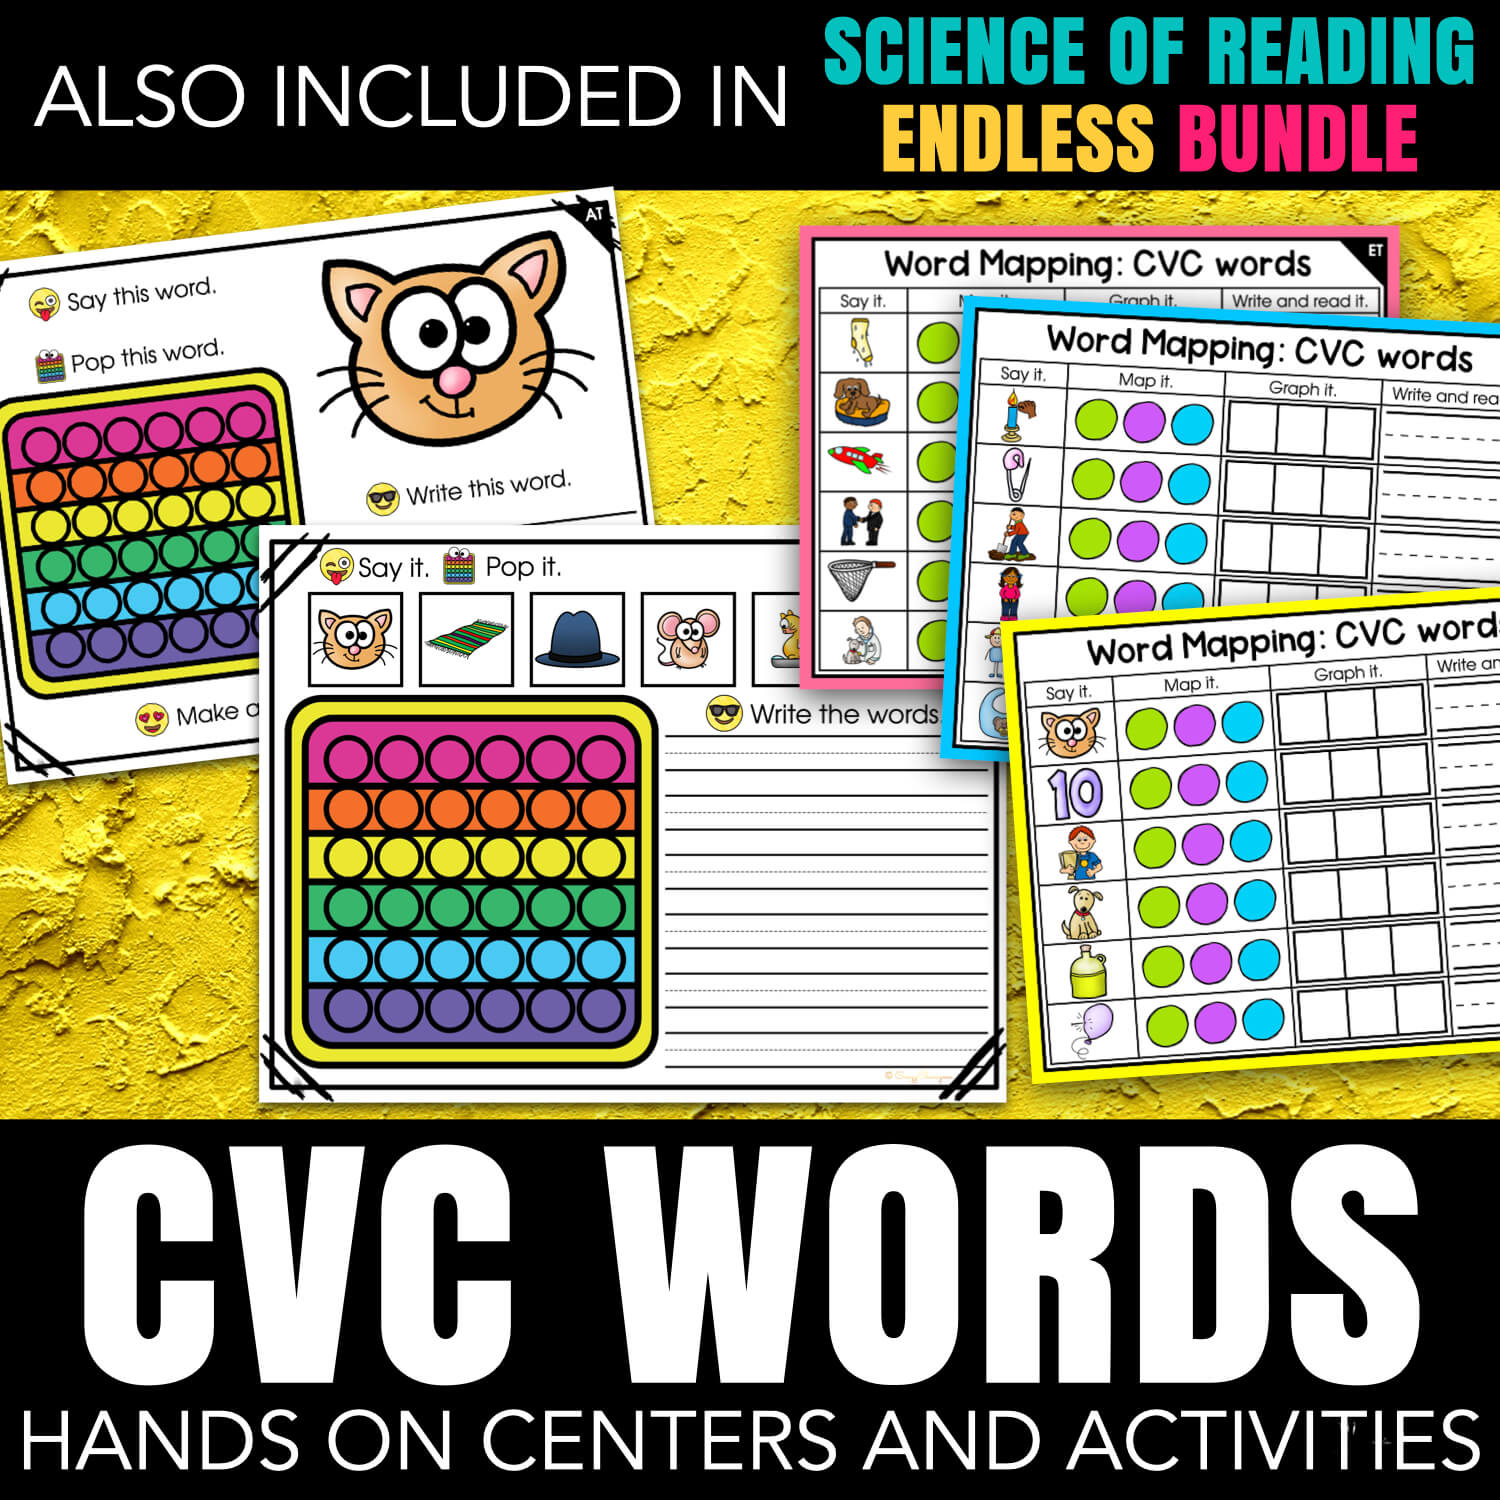 CVC Words Hands-On Centers Science of Reading